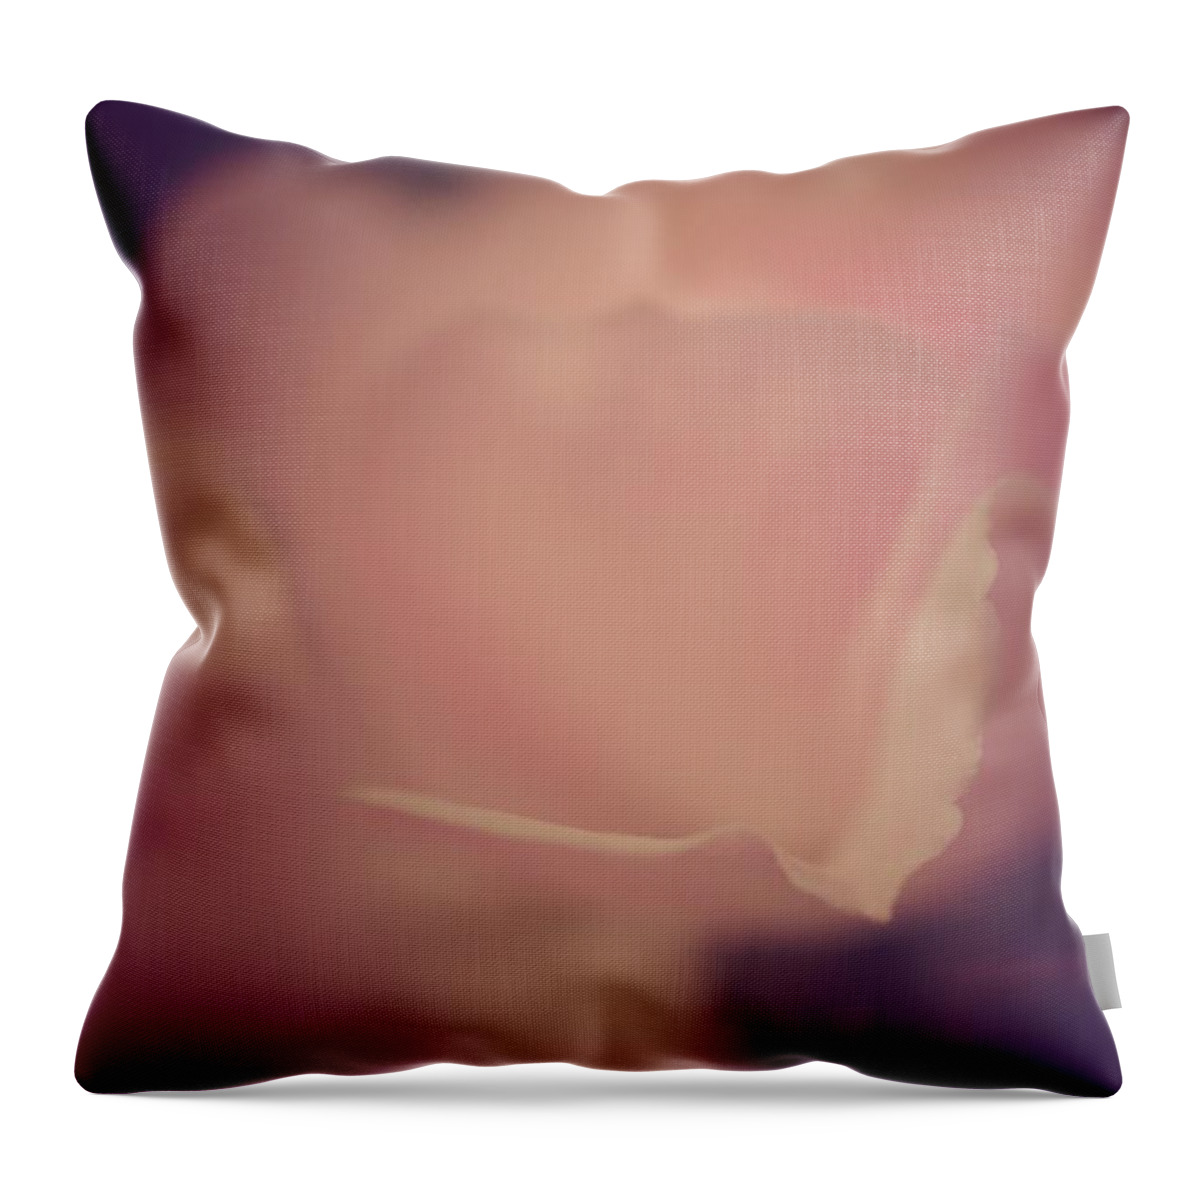  Throw Pillow featuring the photograph Sublime Beauty by The Art Of Marilyn Ridoutt-Greene